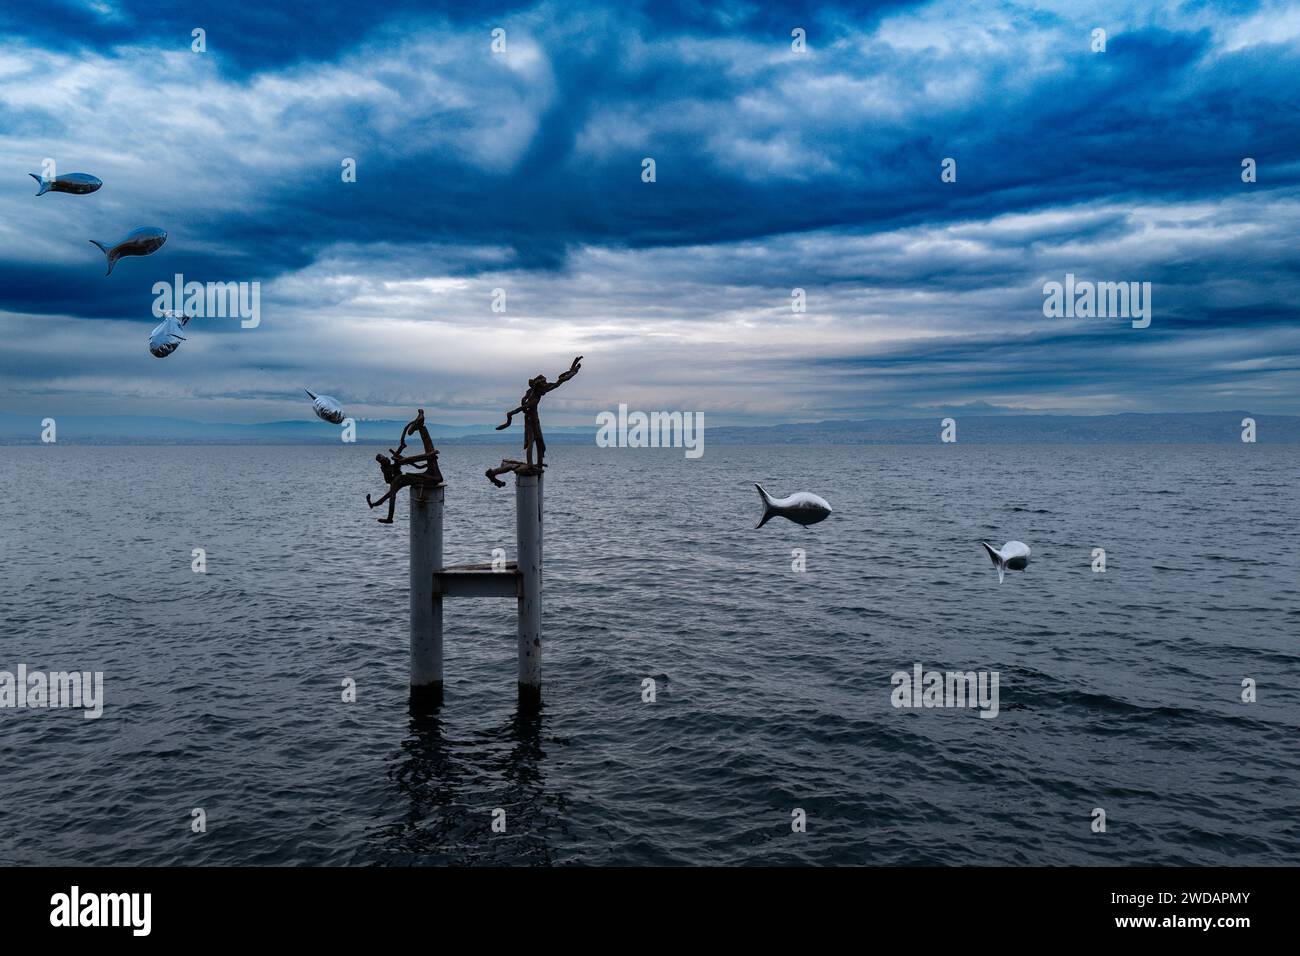 Two individuals perched atop a pole amidst the vast ocean Stock Photo